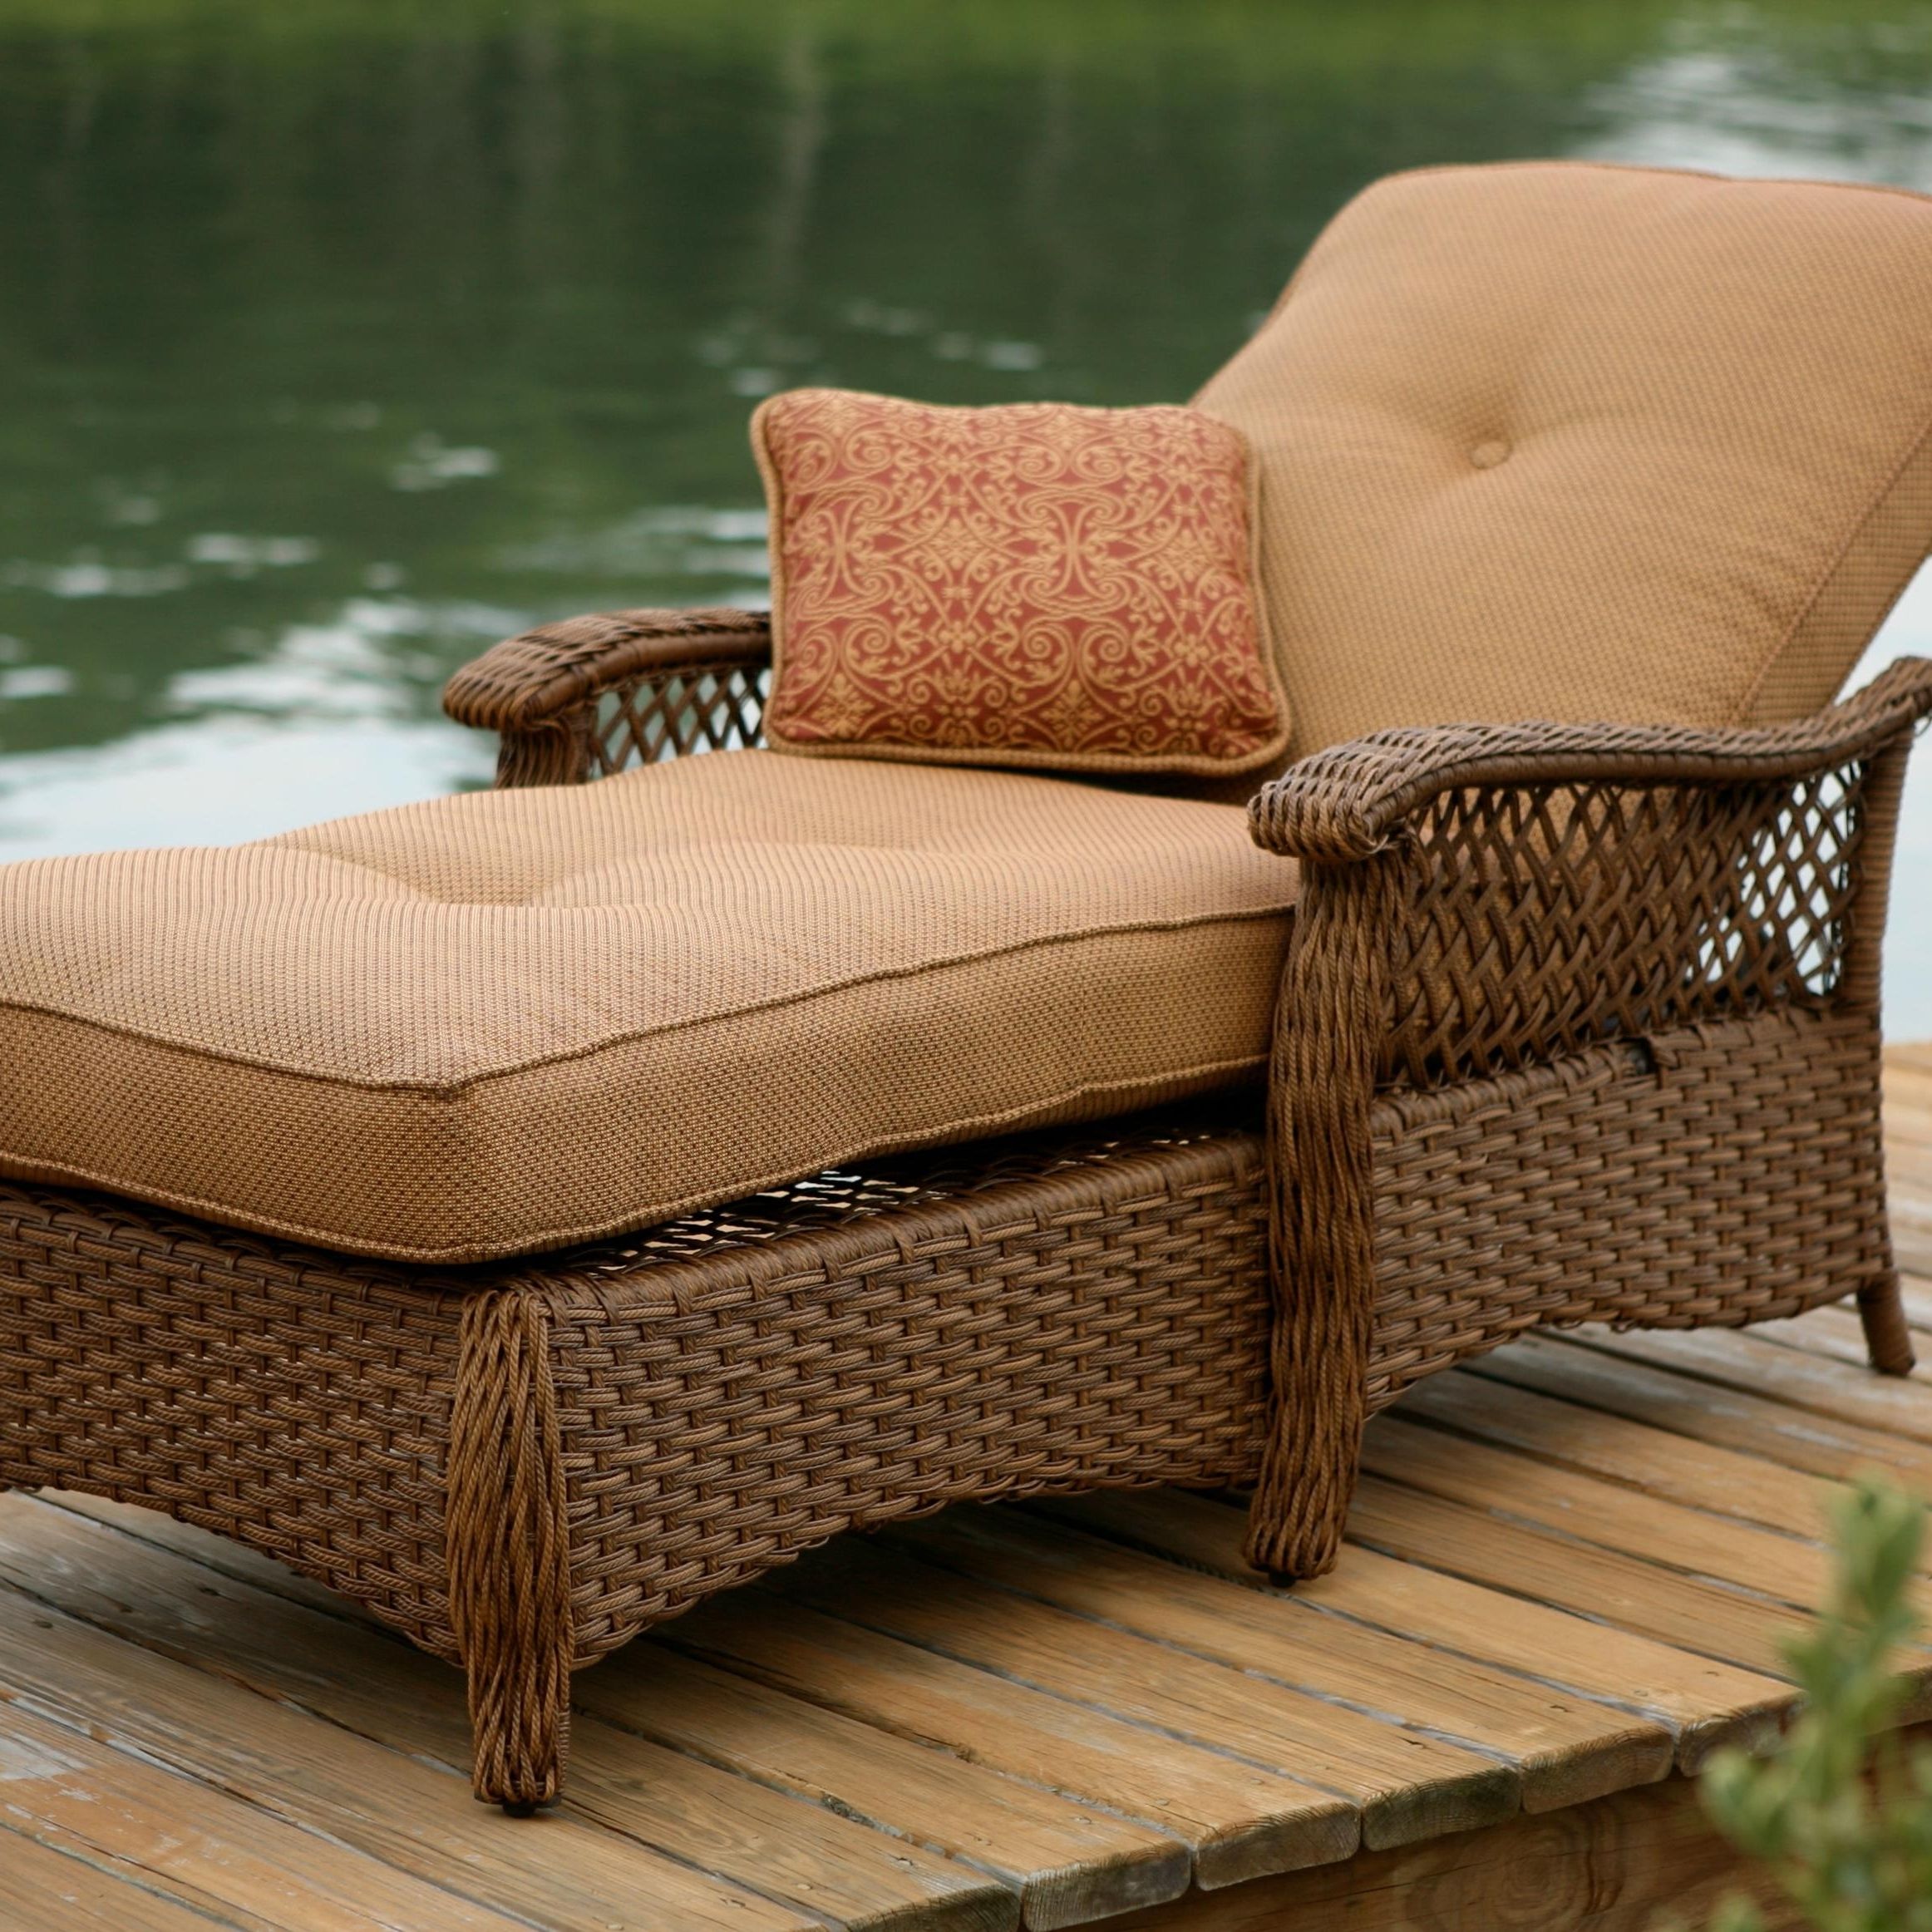 Most Current Comfortable Outdoor Chaise Lounge Chairs Intended For Agio Veranda–agio Outdoor Tan Woven Chaise Lounge Chair With Seat (View 1 of 15)